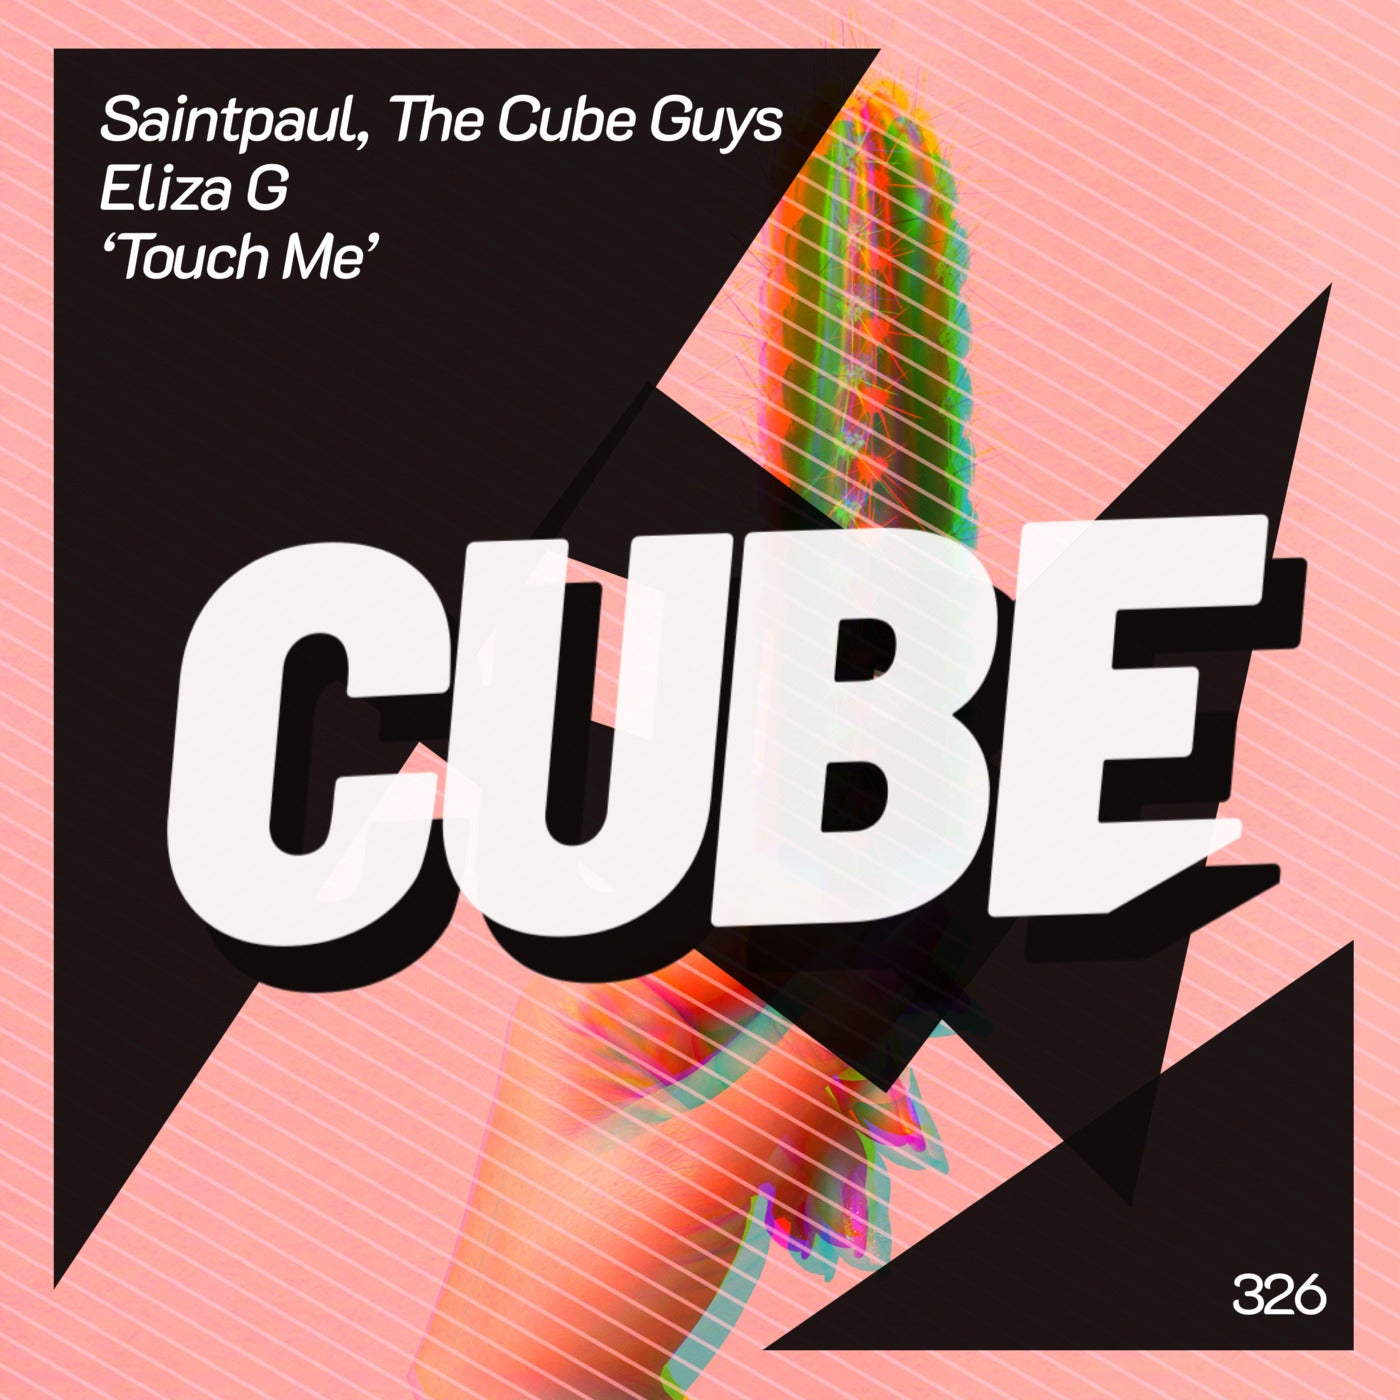 image cover: The Cube Guys, SaintPaul DJ, Eliza G - Touch Me on Cube Recordings